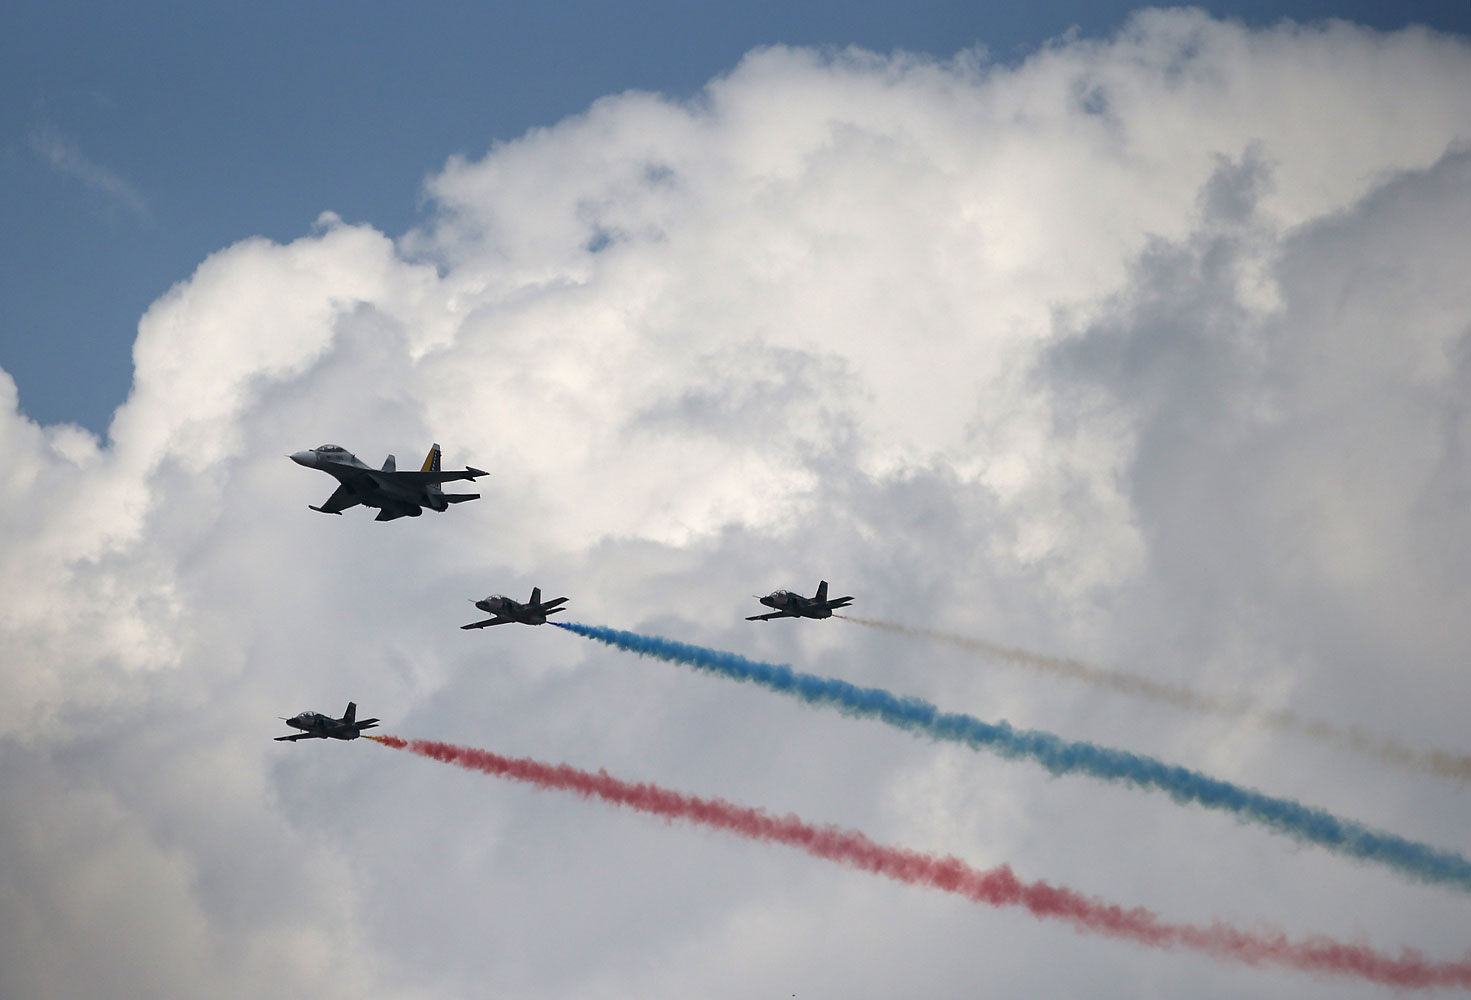 Venezuelan Air Force jets fly over an official parade marking the first anniversary of Hugo Chavez death on March 5, 2014 in Caracas, Venezuela.